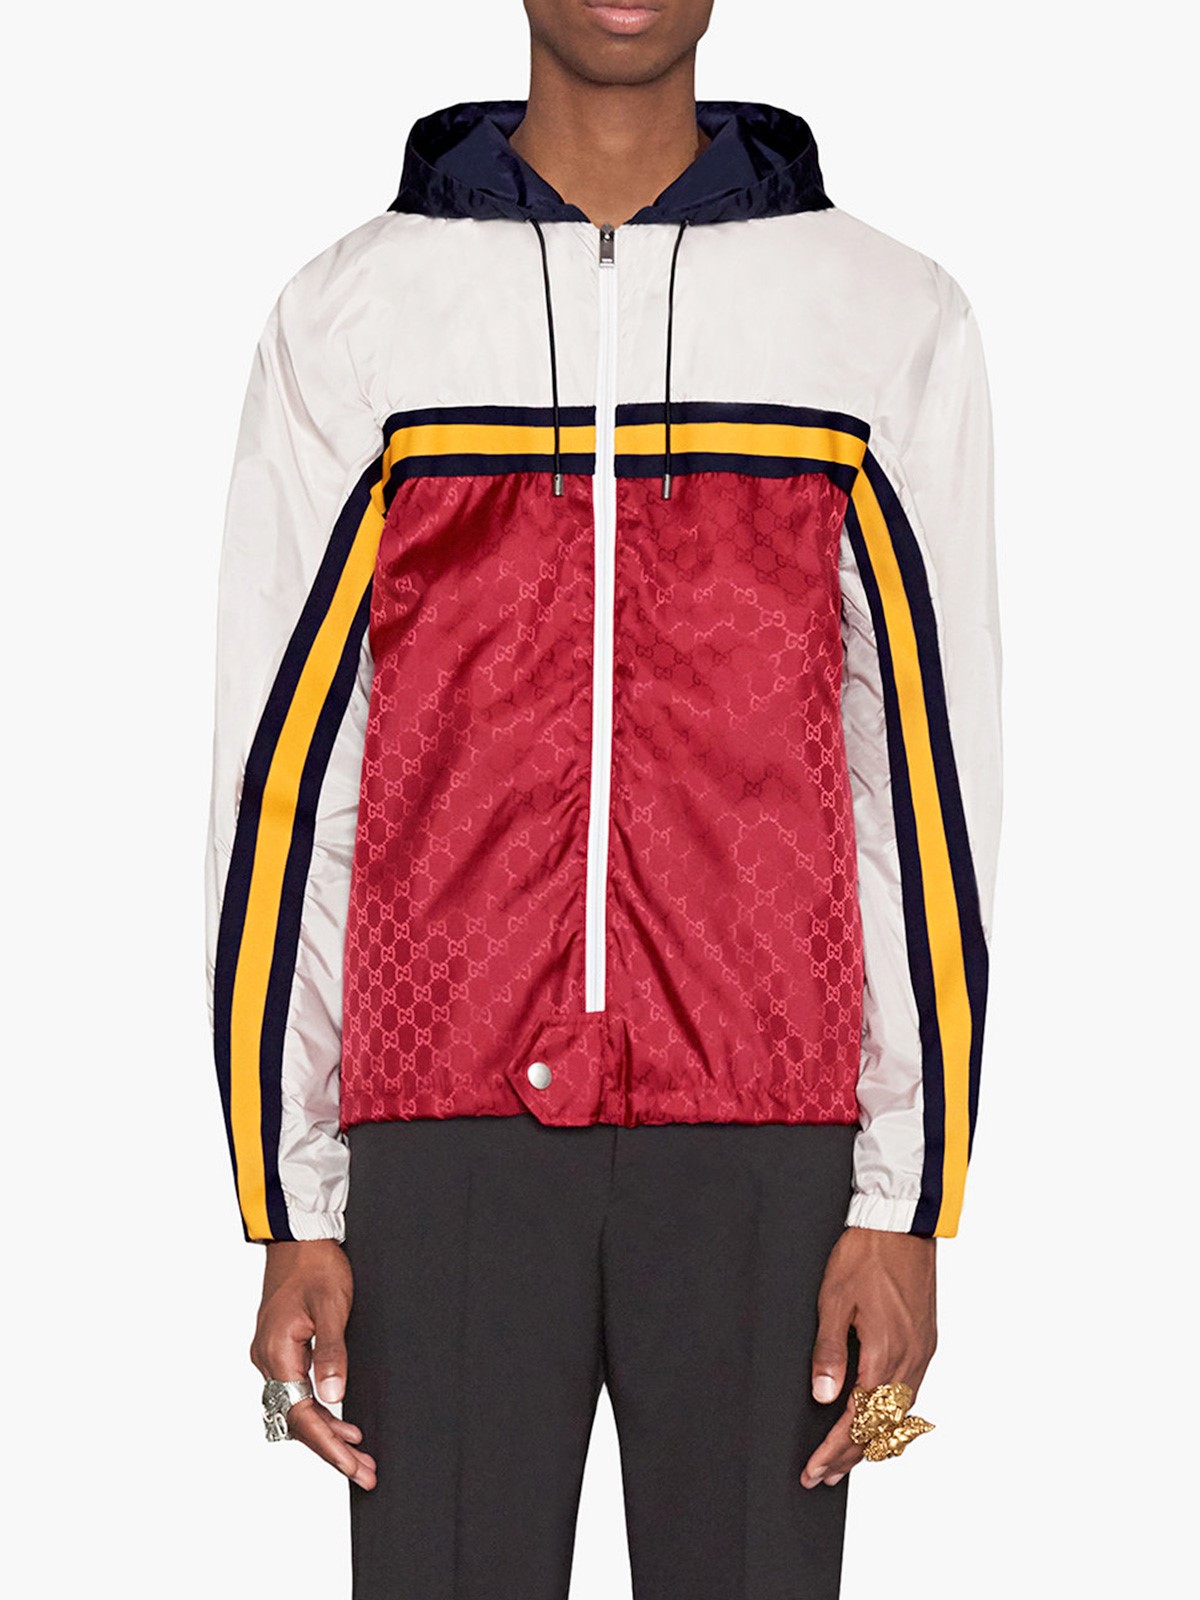 gucci GUCCY NYLON JACKET available on montiboutique.com - 21998